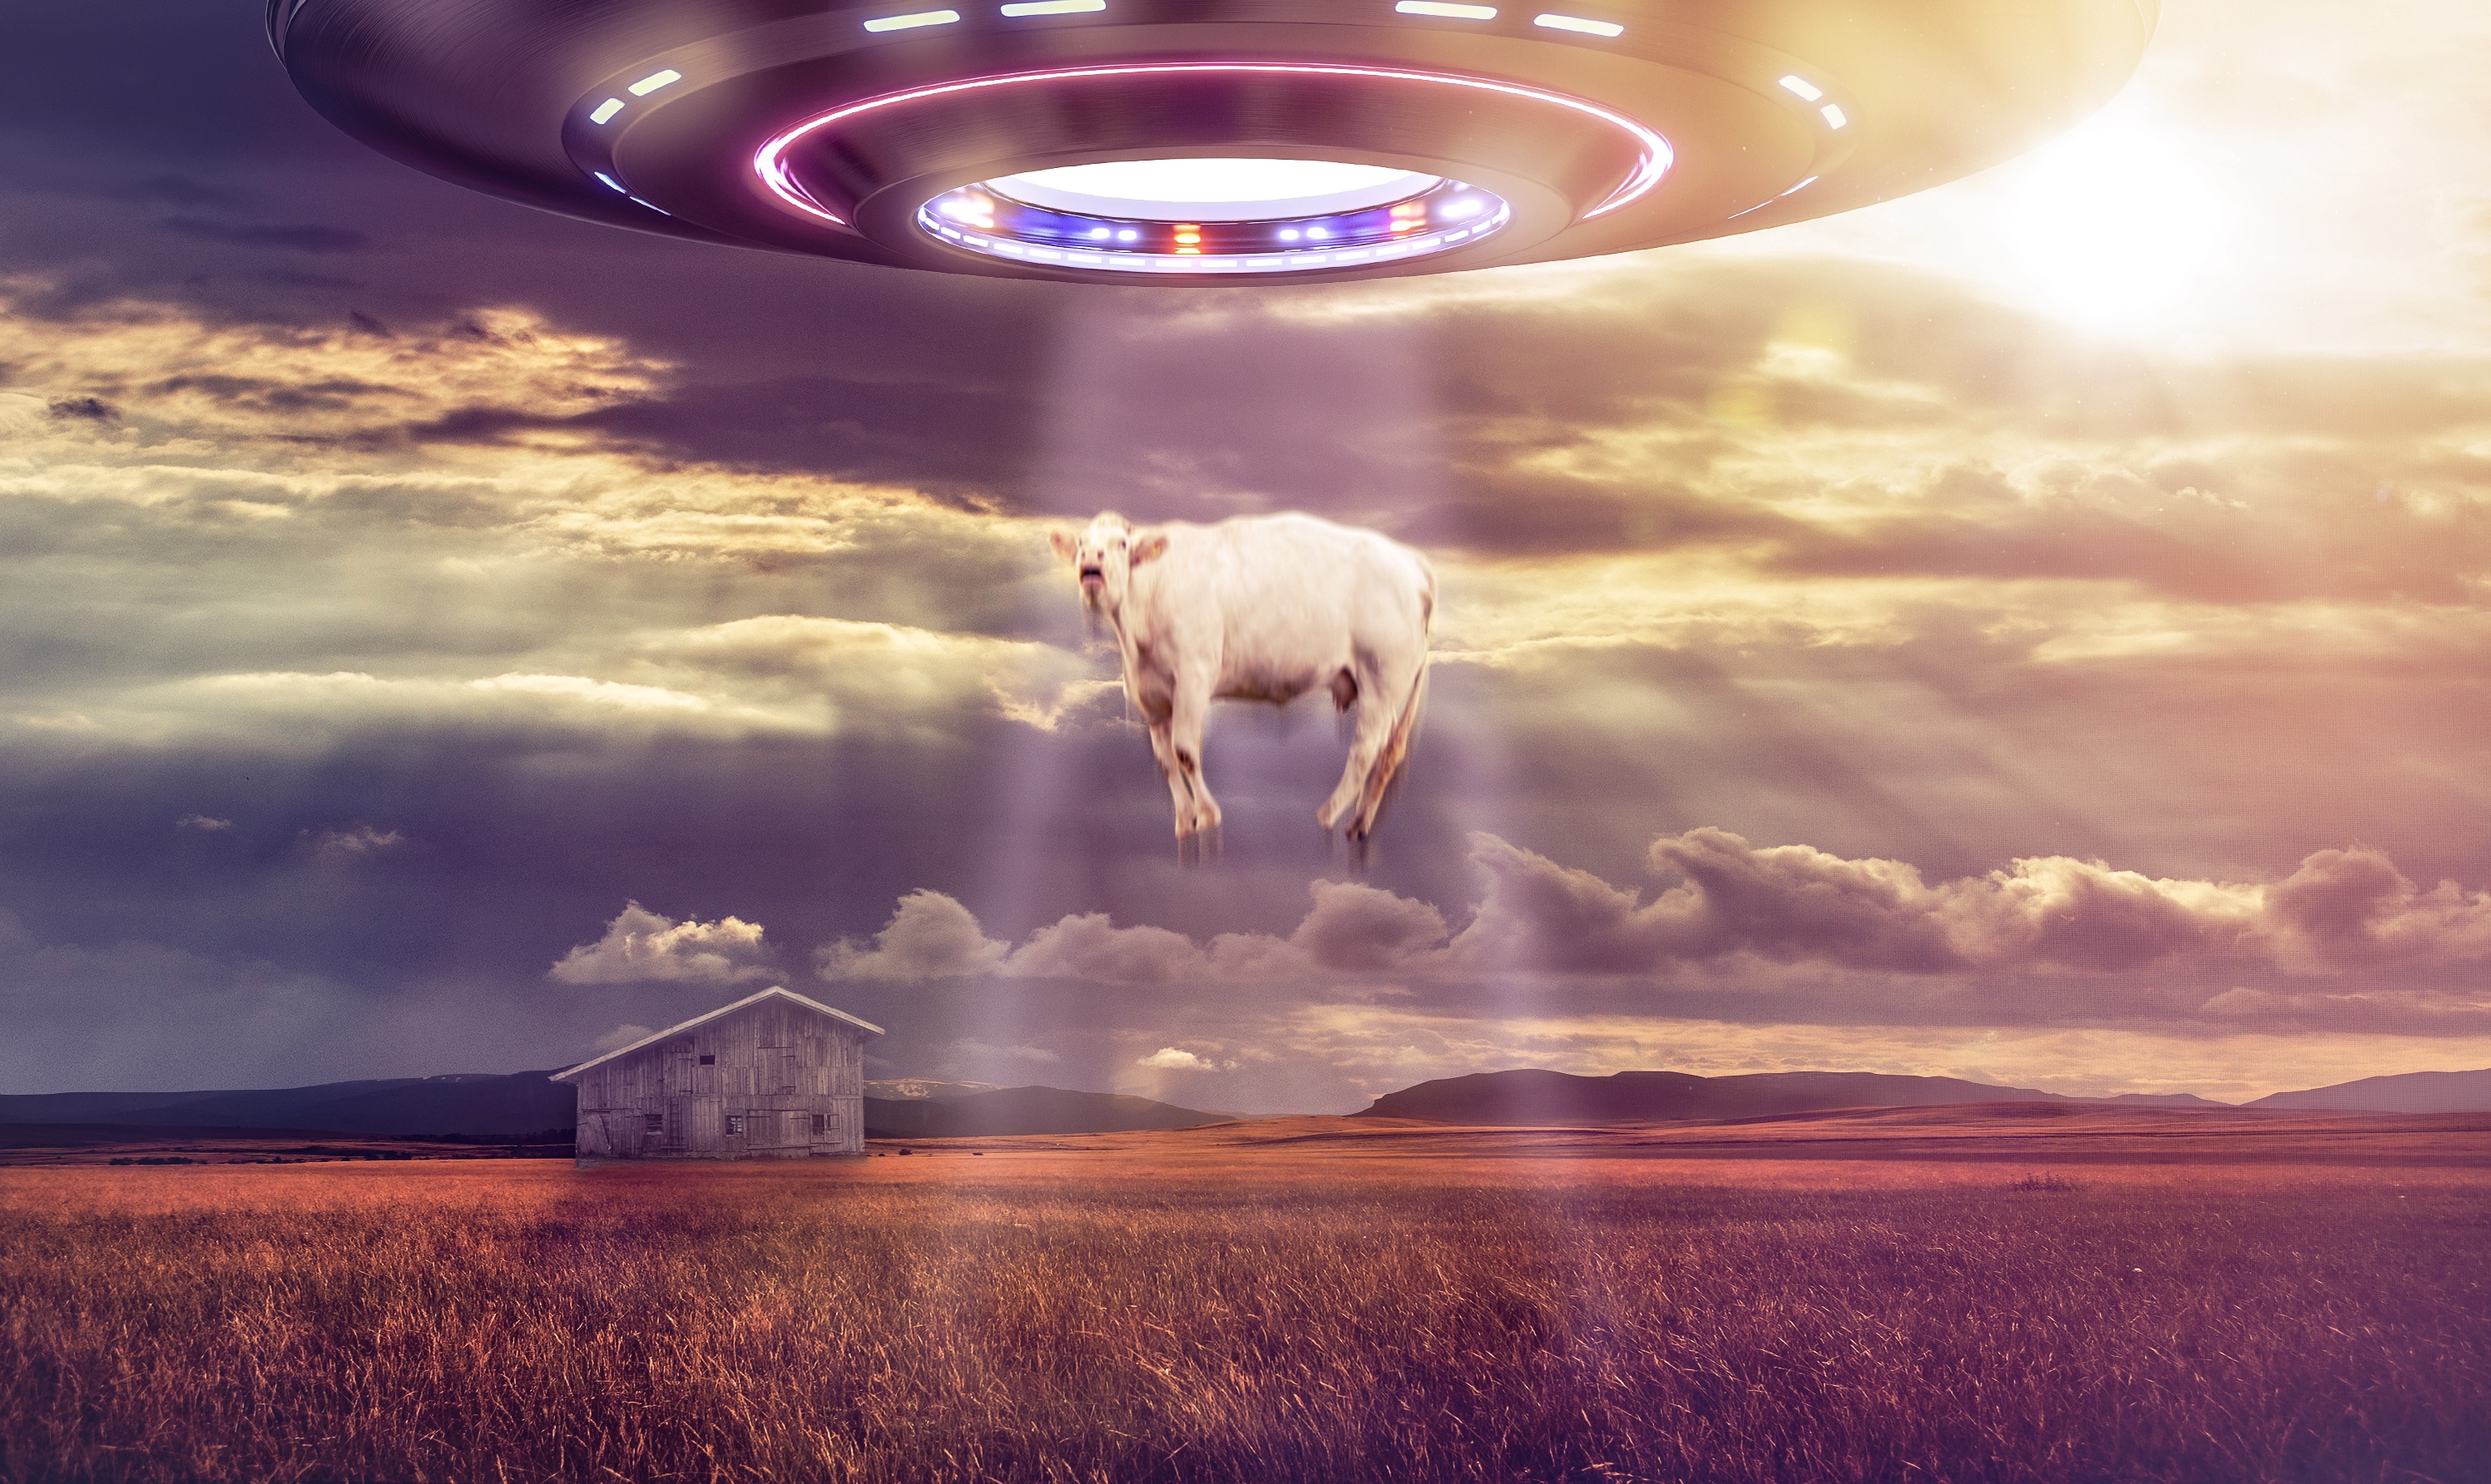 UFO abducts a cow drawing free image download